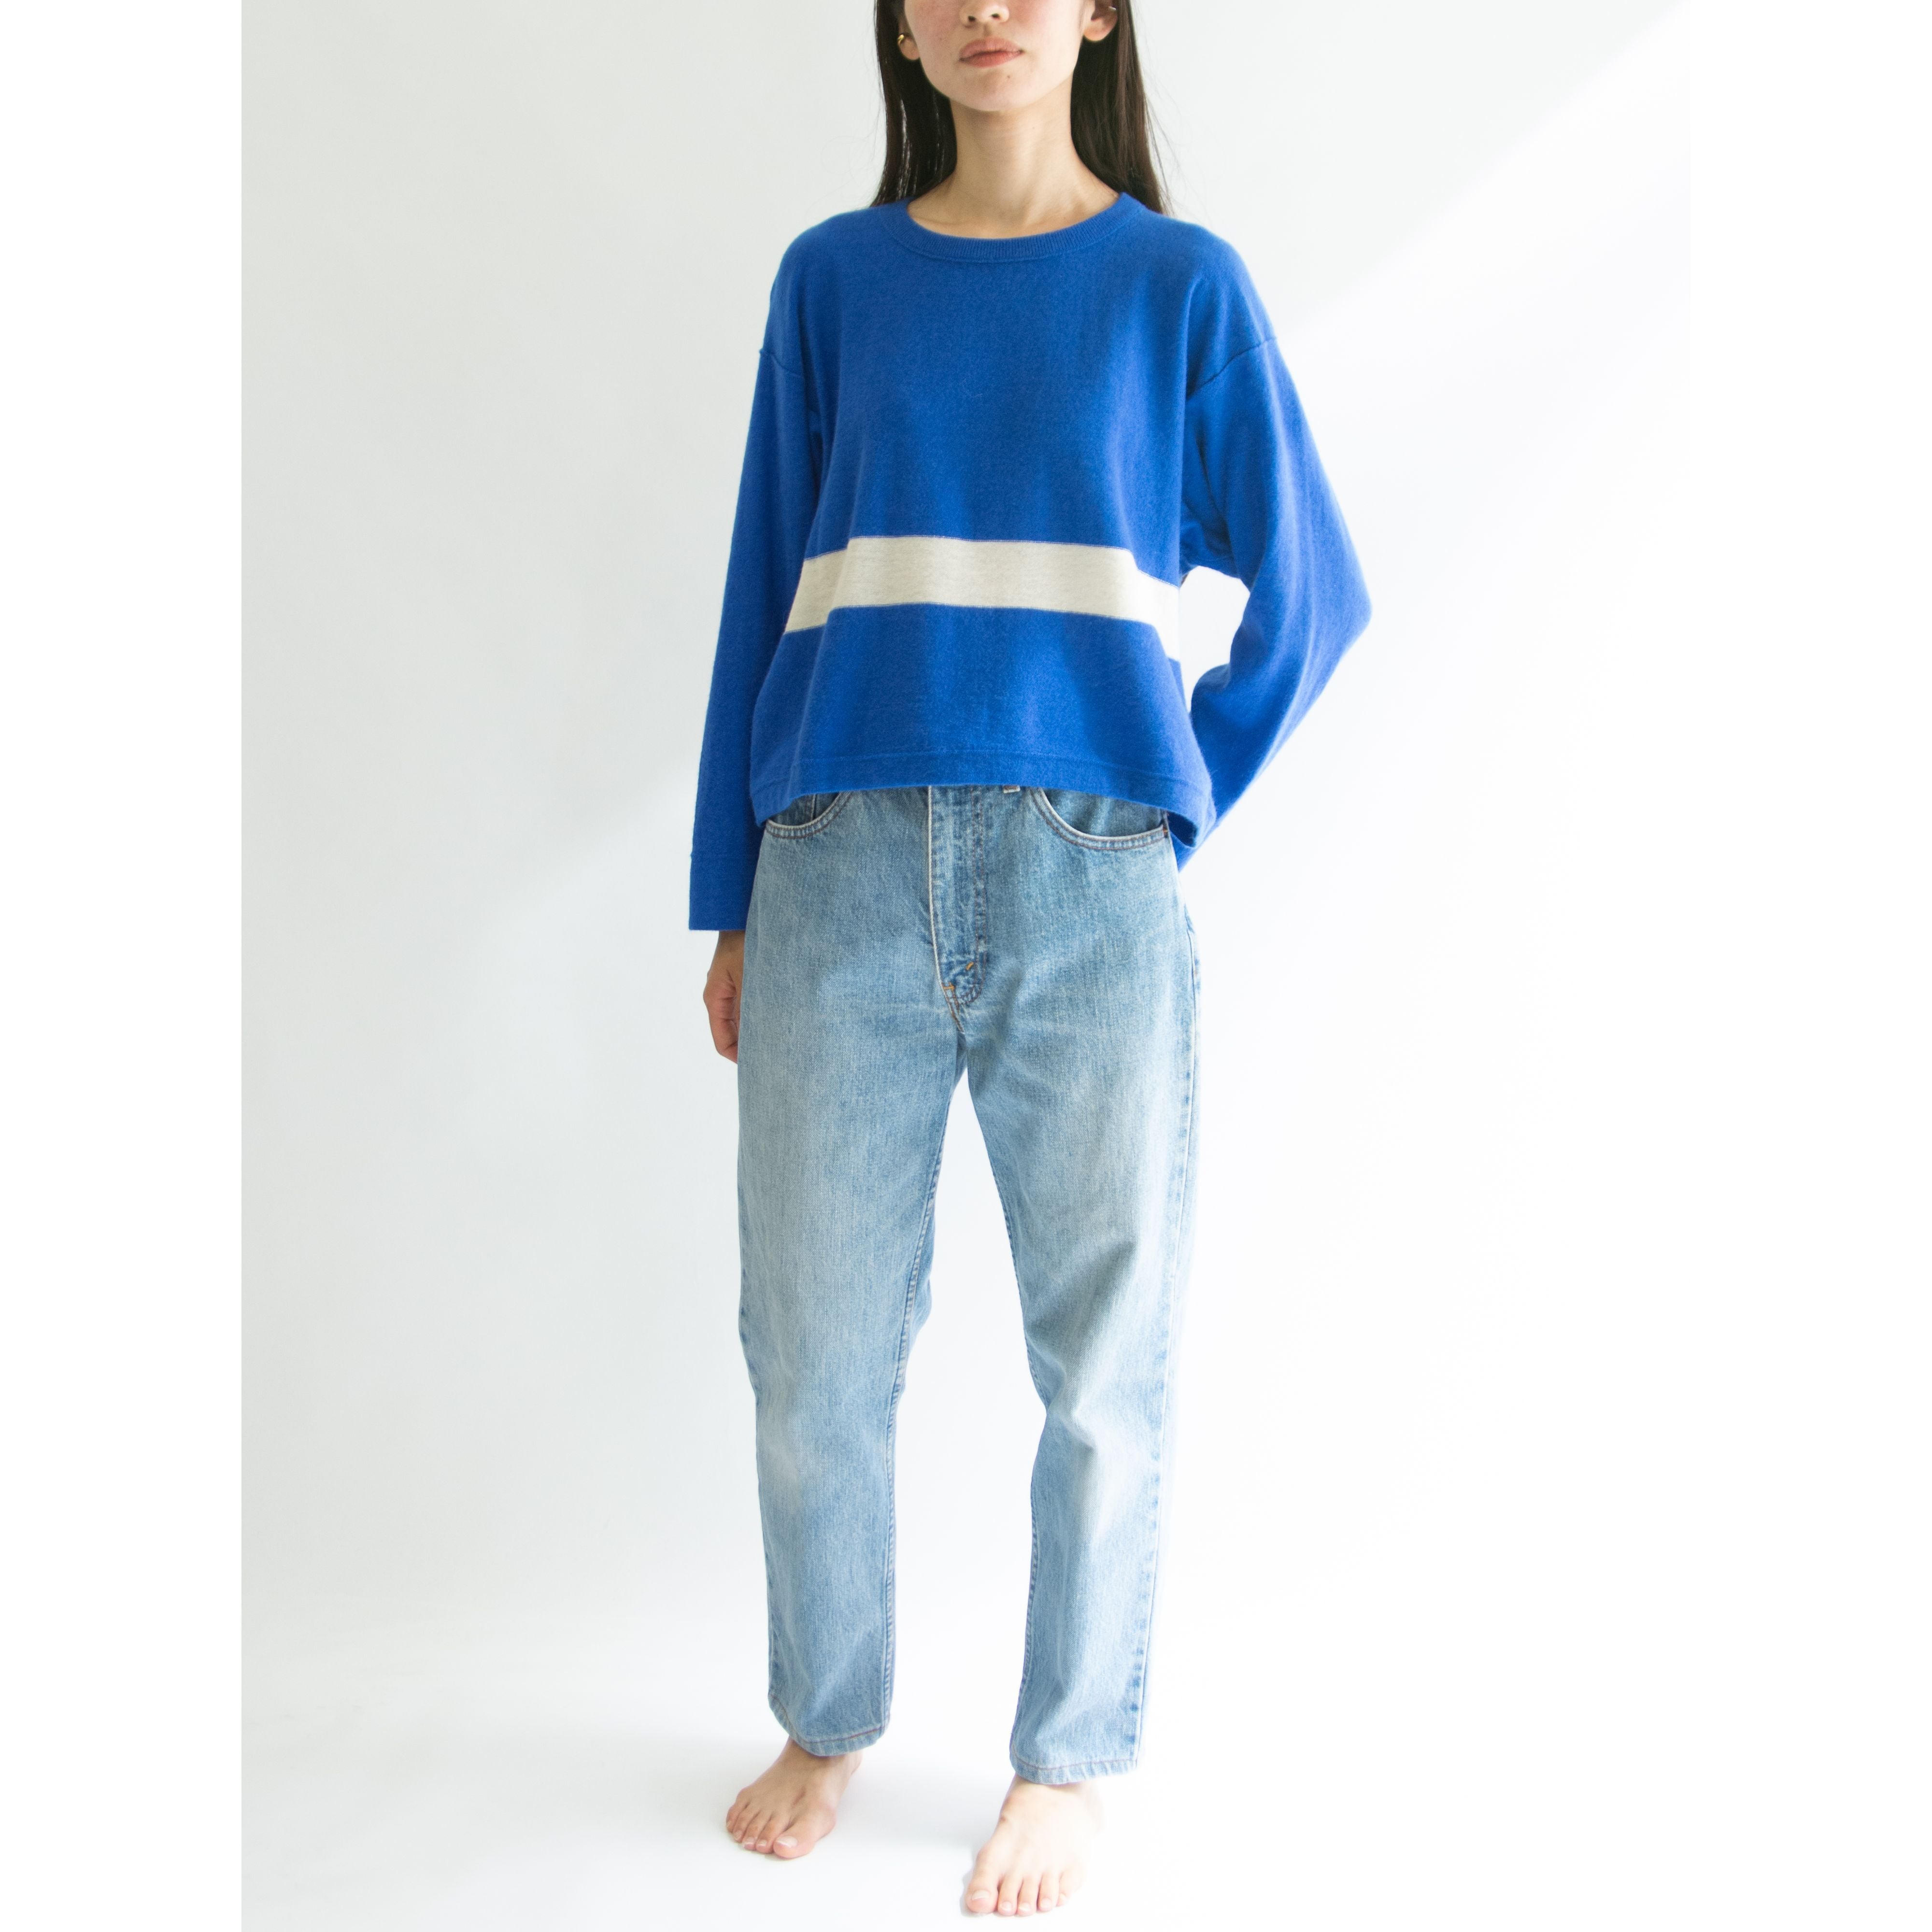 SONIA RYKIEL】Made in Italy 70's Oversized Sweater（ソニアリキエル